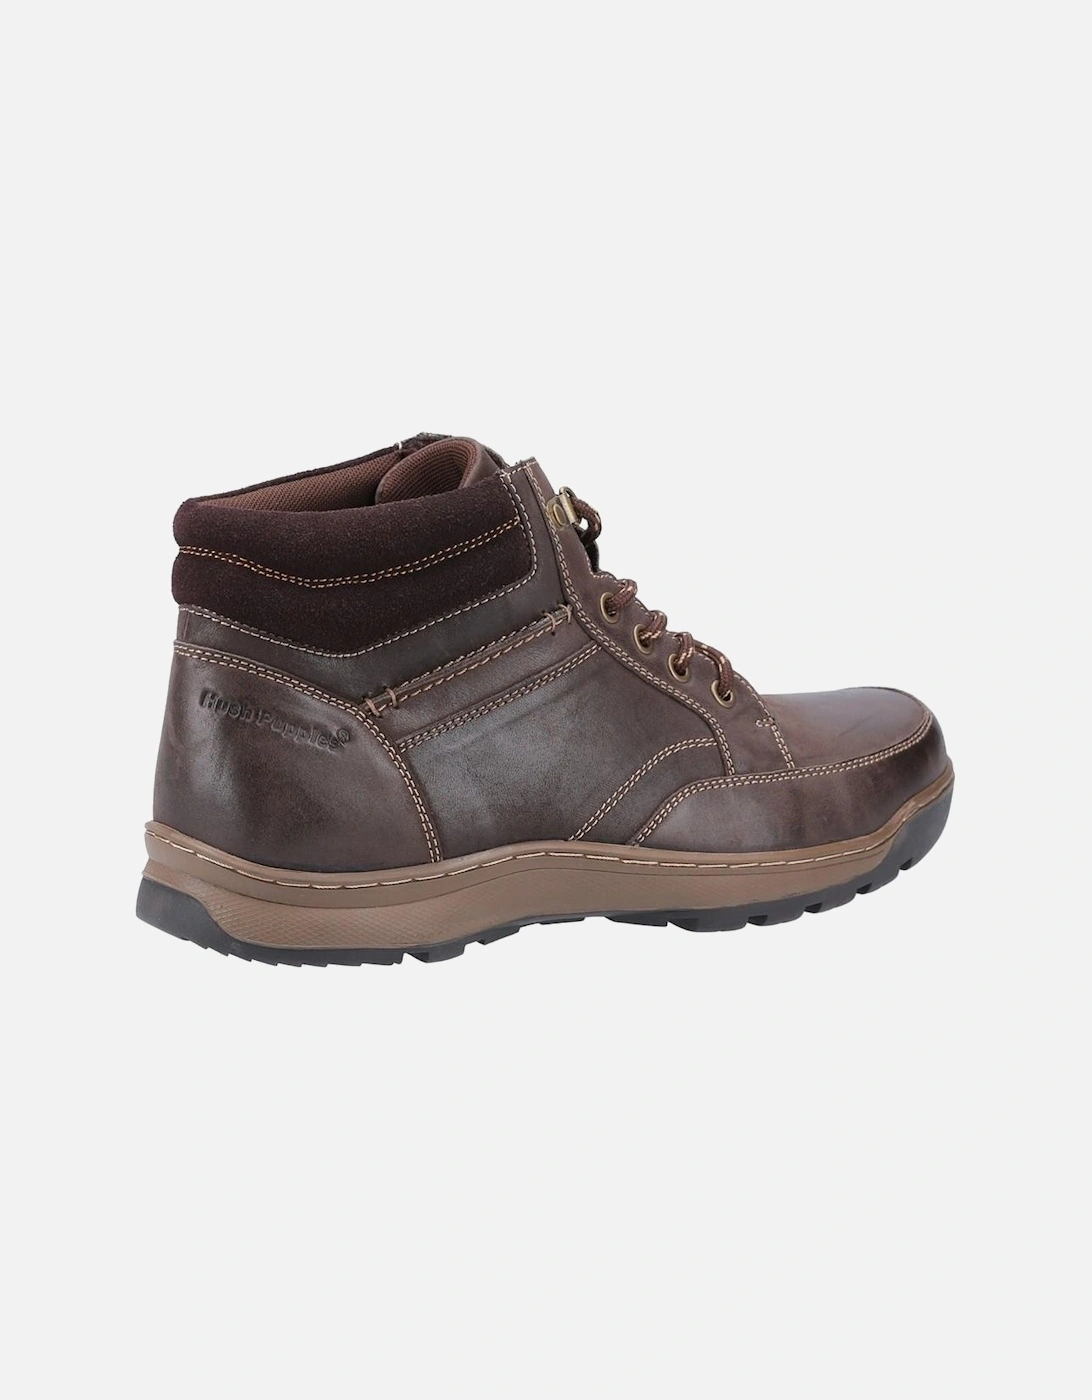 Mens Grover Leather Boots